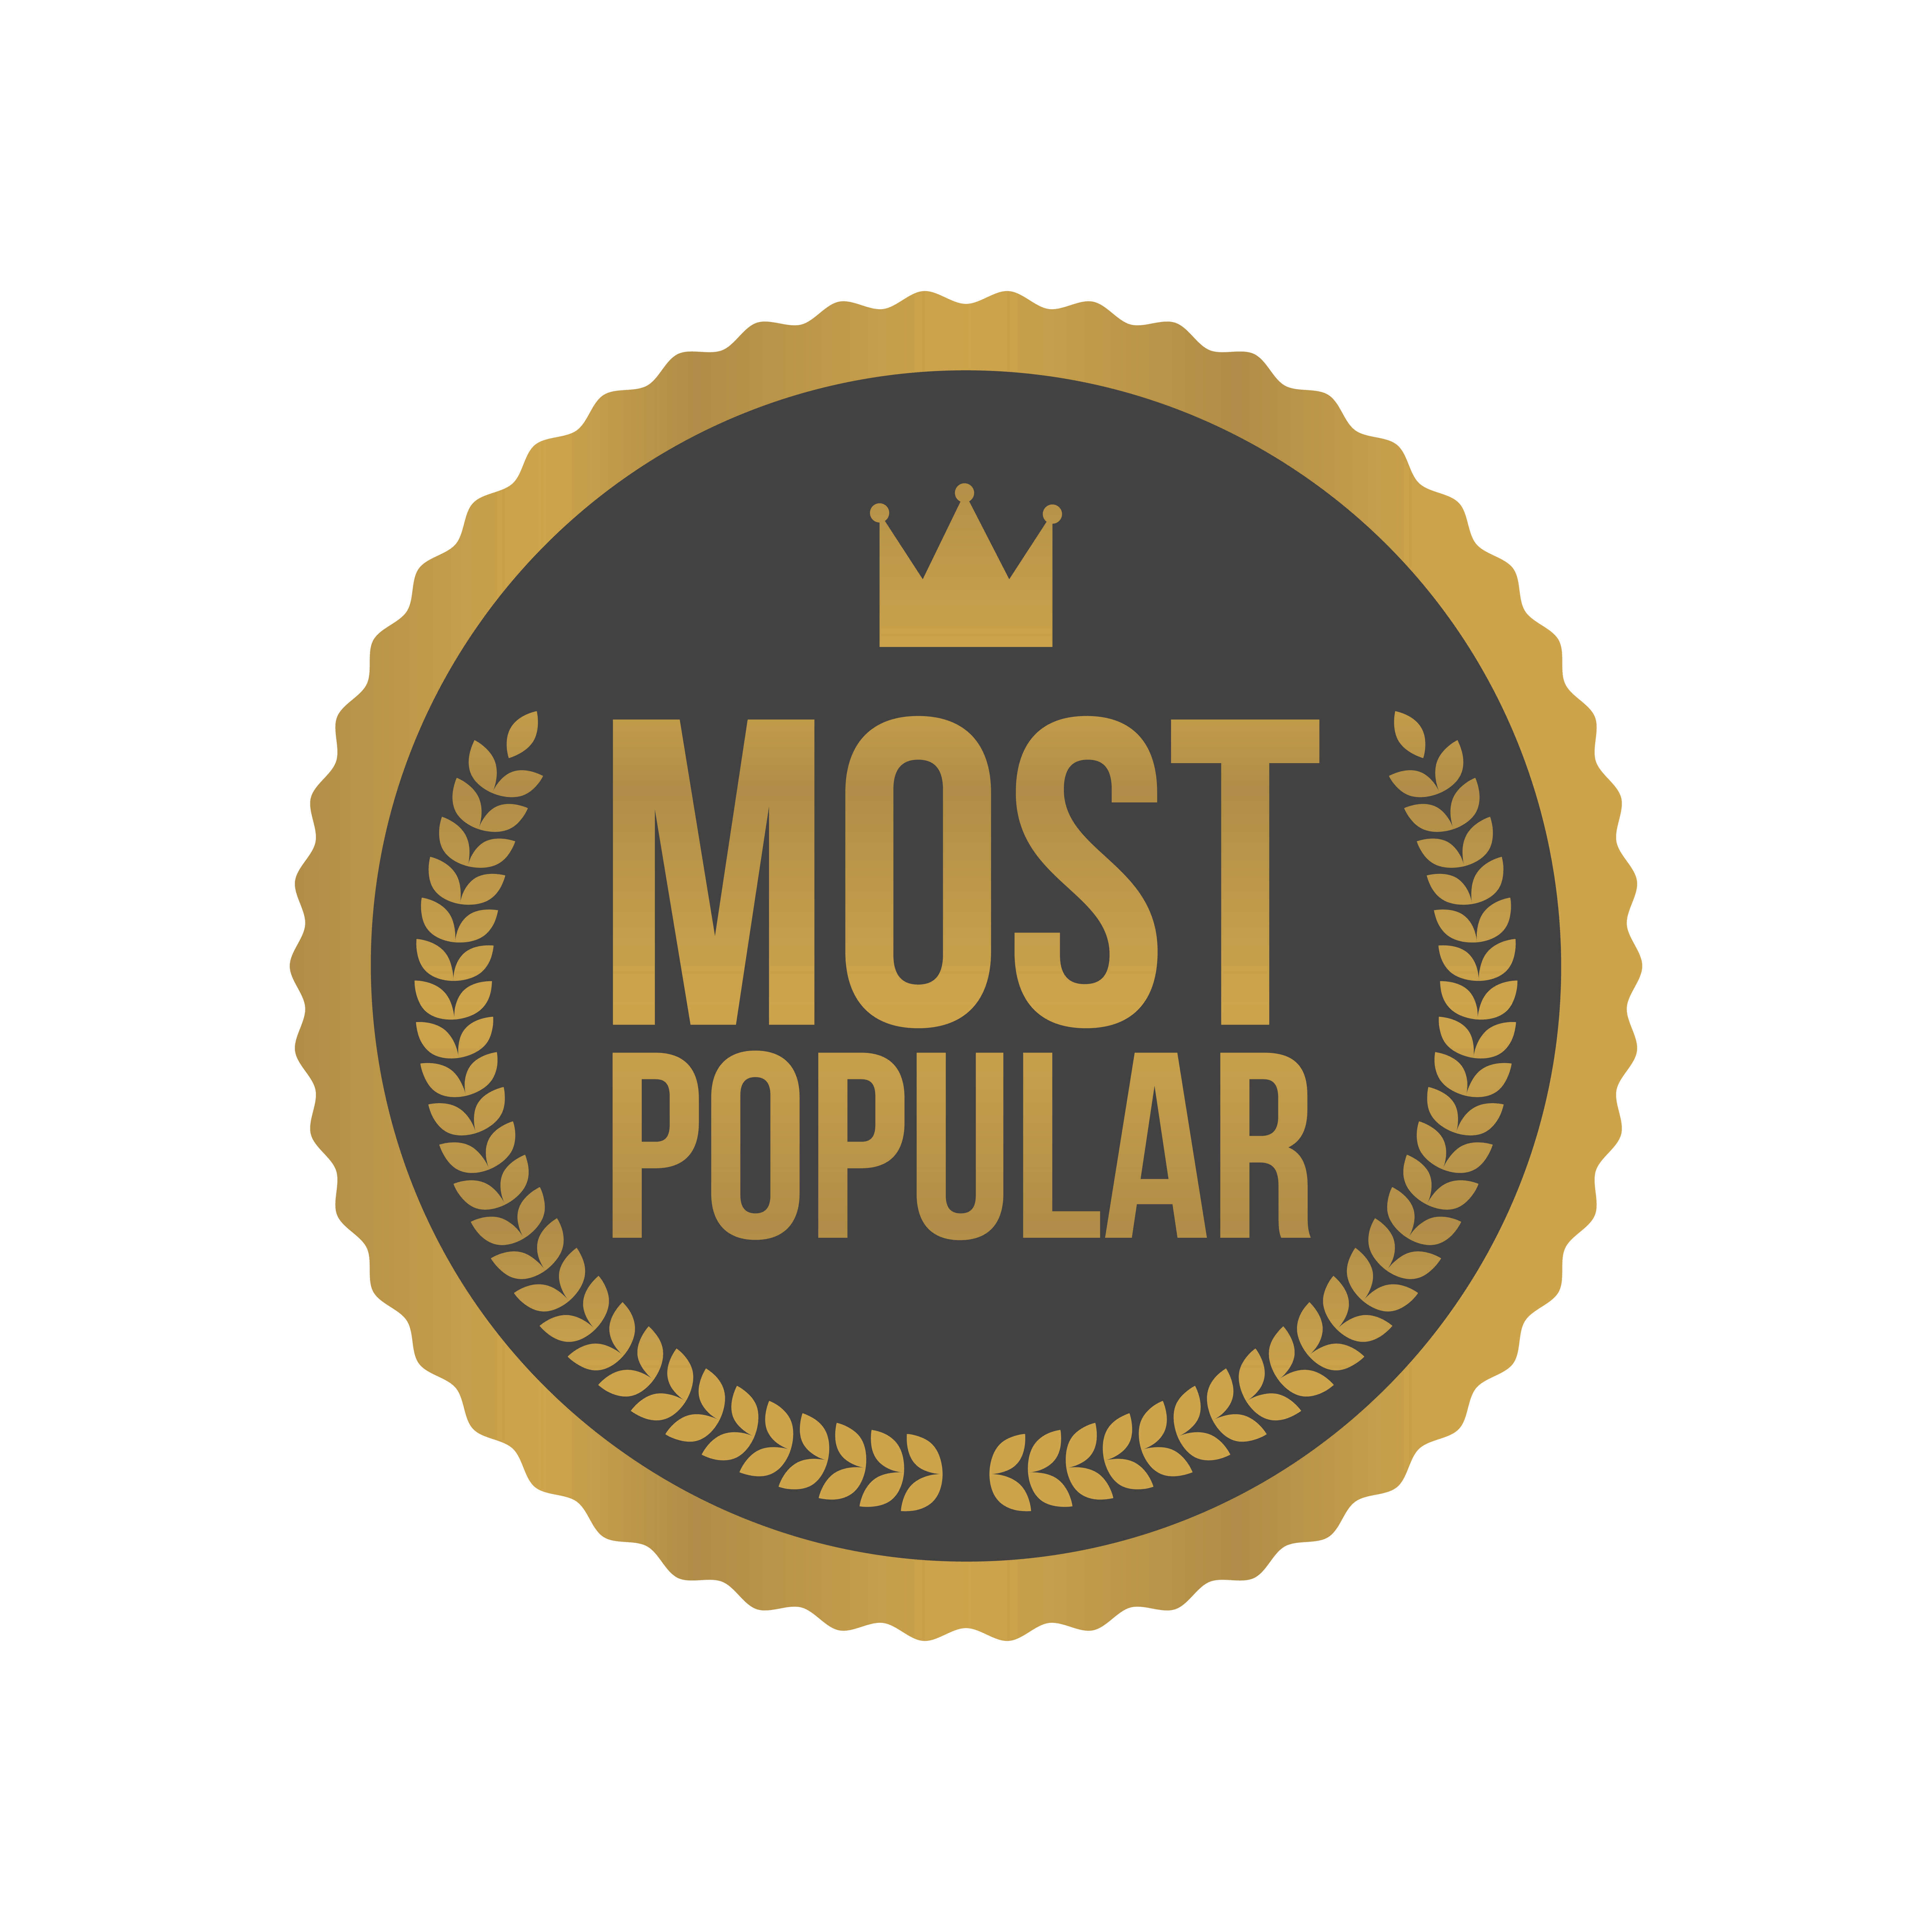 A gold badge showing a crown sitting on top of the words most popular